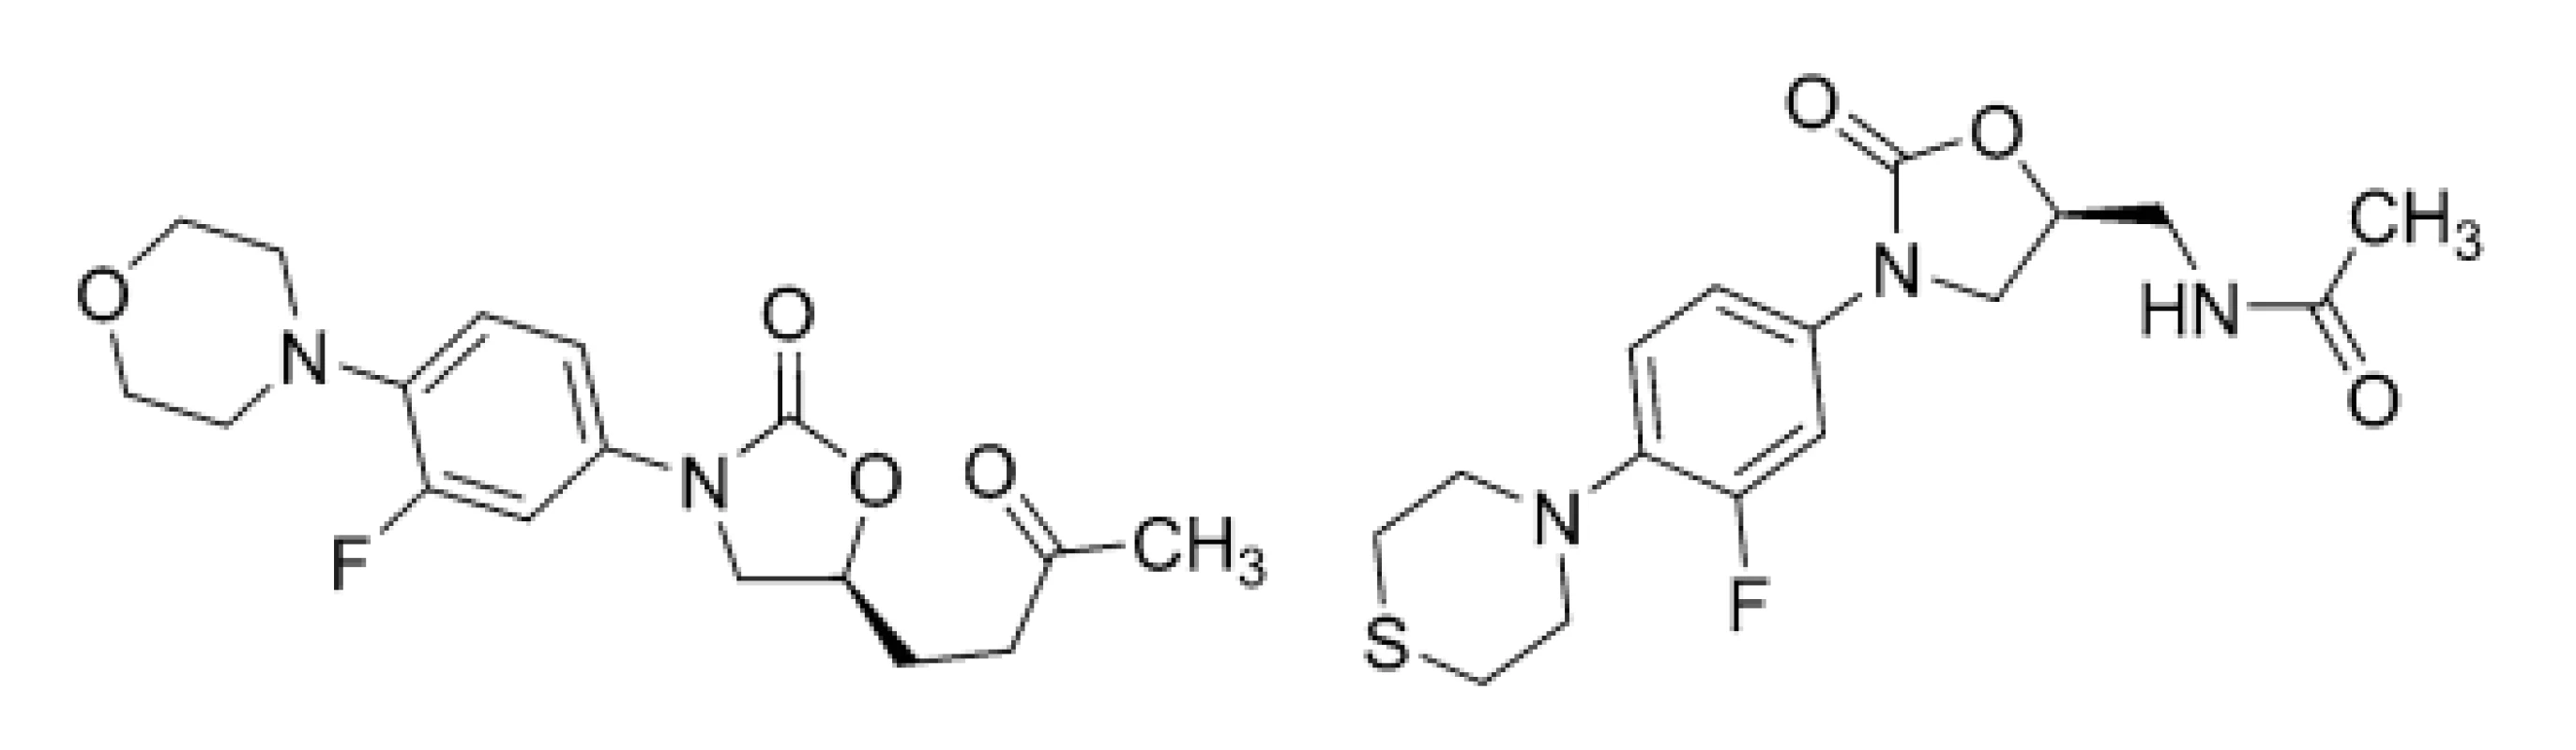 Chemical structures of linezolid (LNZ; 4) and sutezolid (STZ; 5)